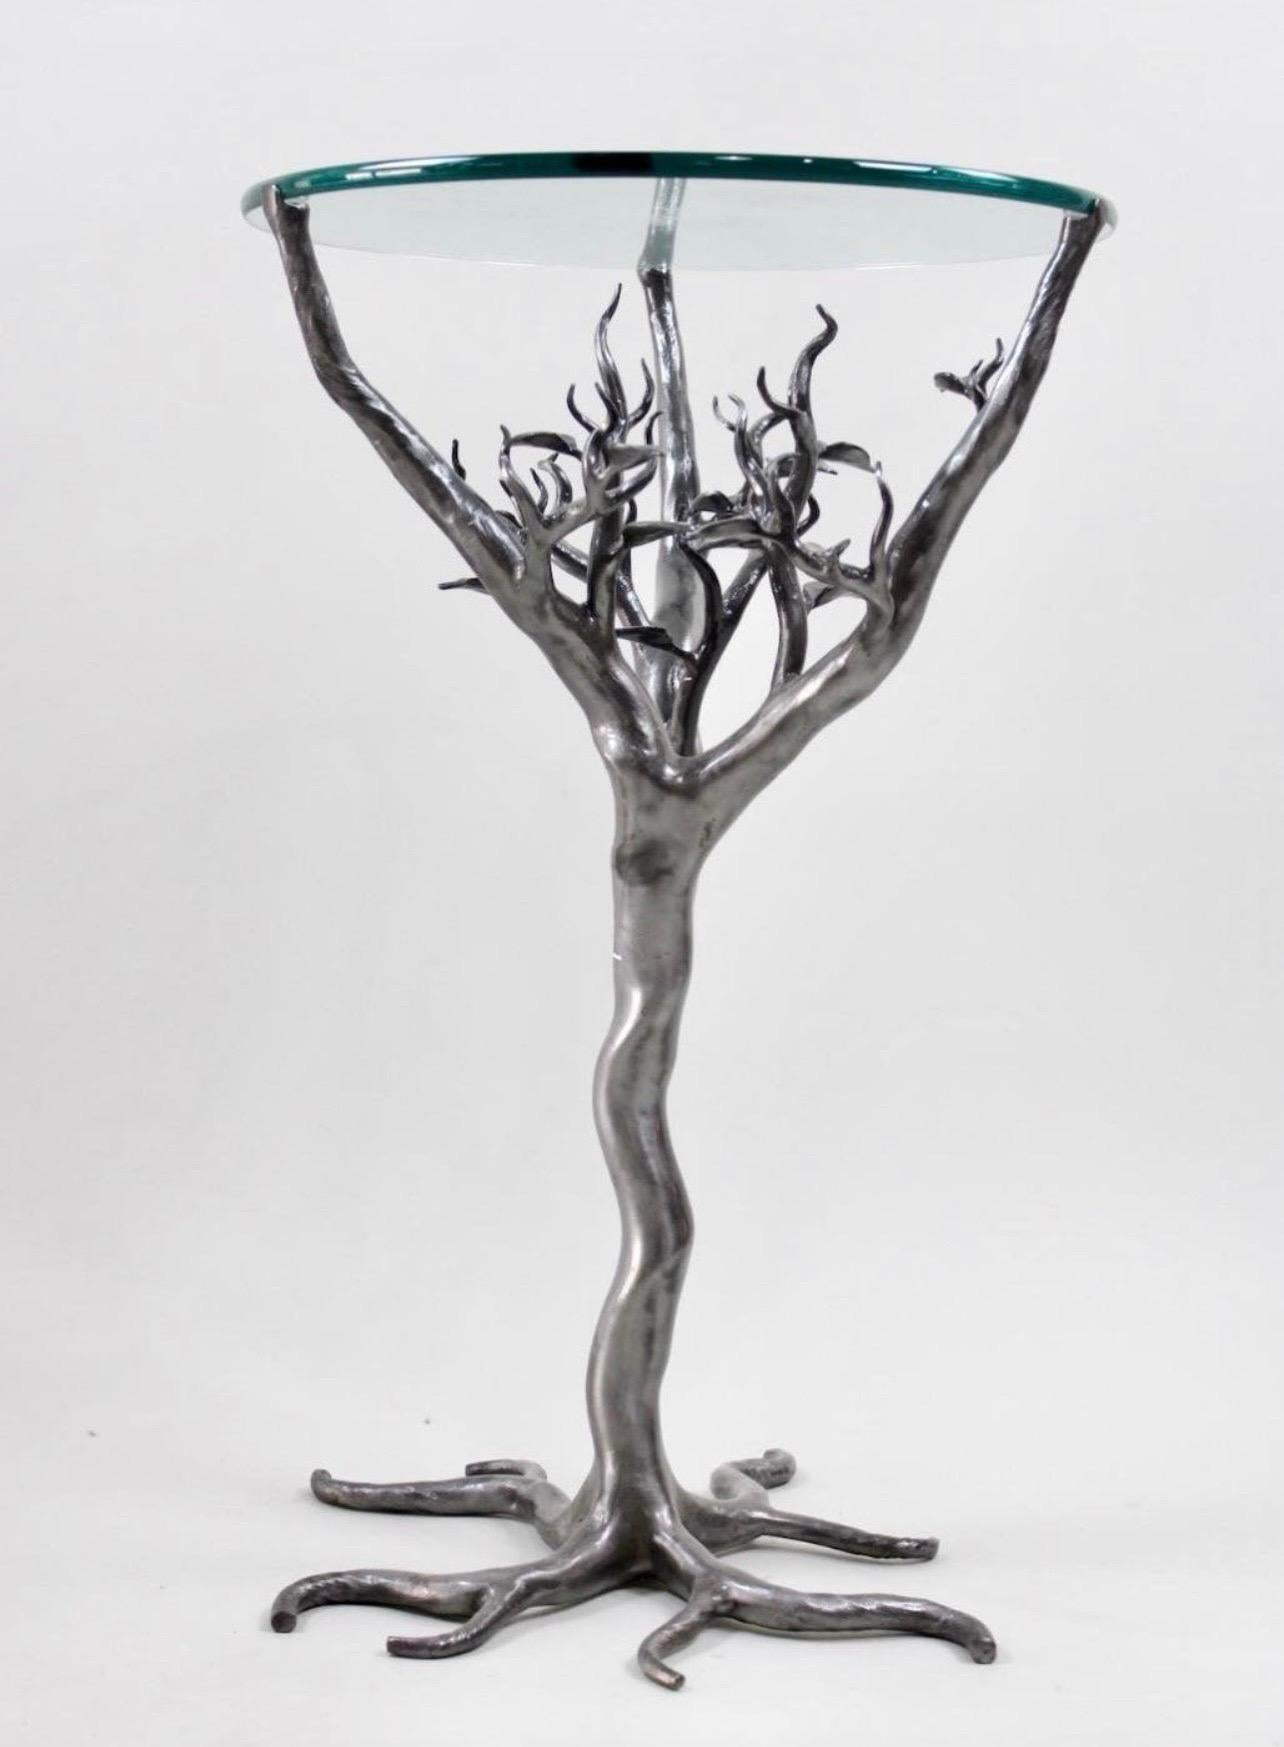 Italian Signed Hand Forged Iron Sculptural Tree Branch Glass Top Table For Sale